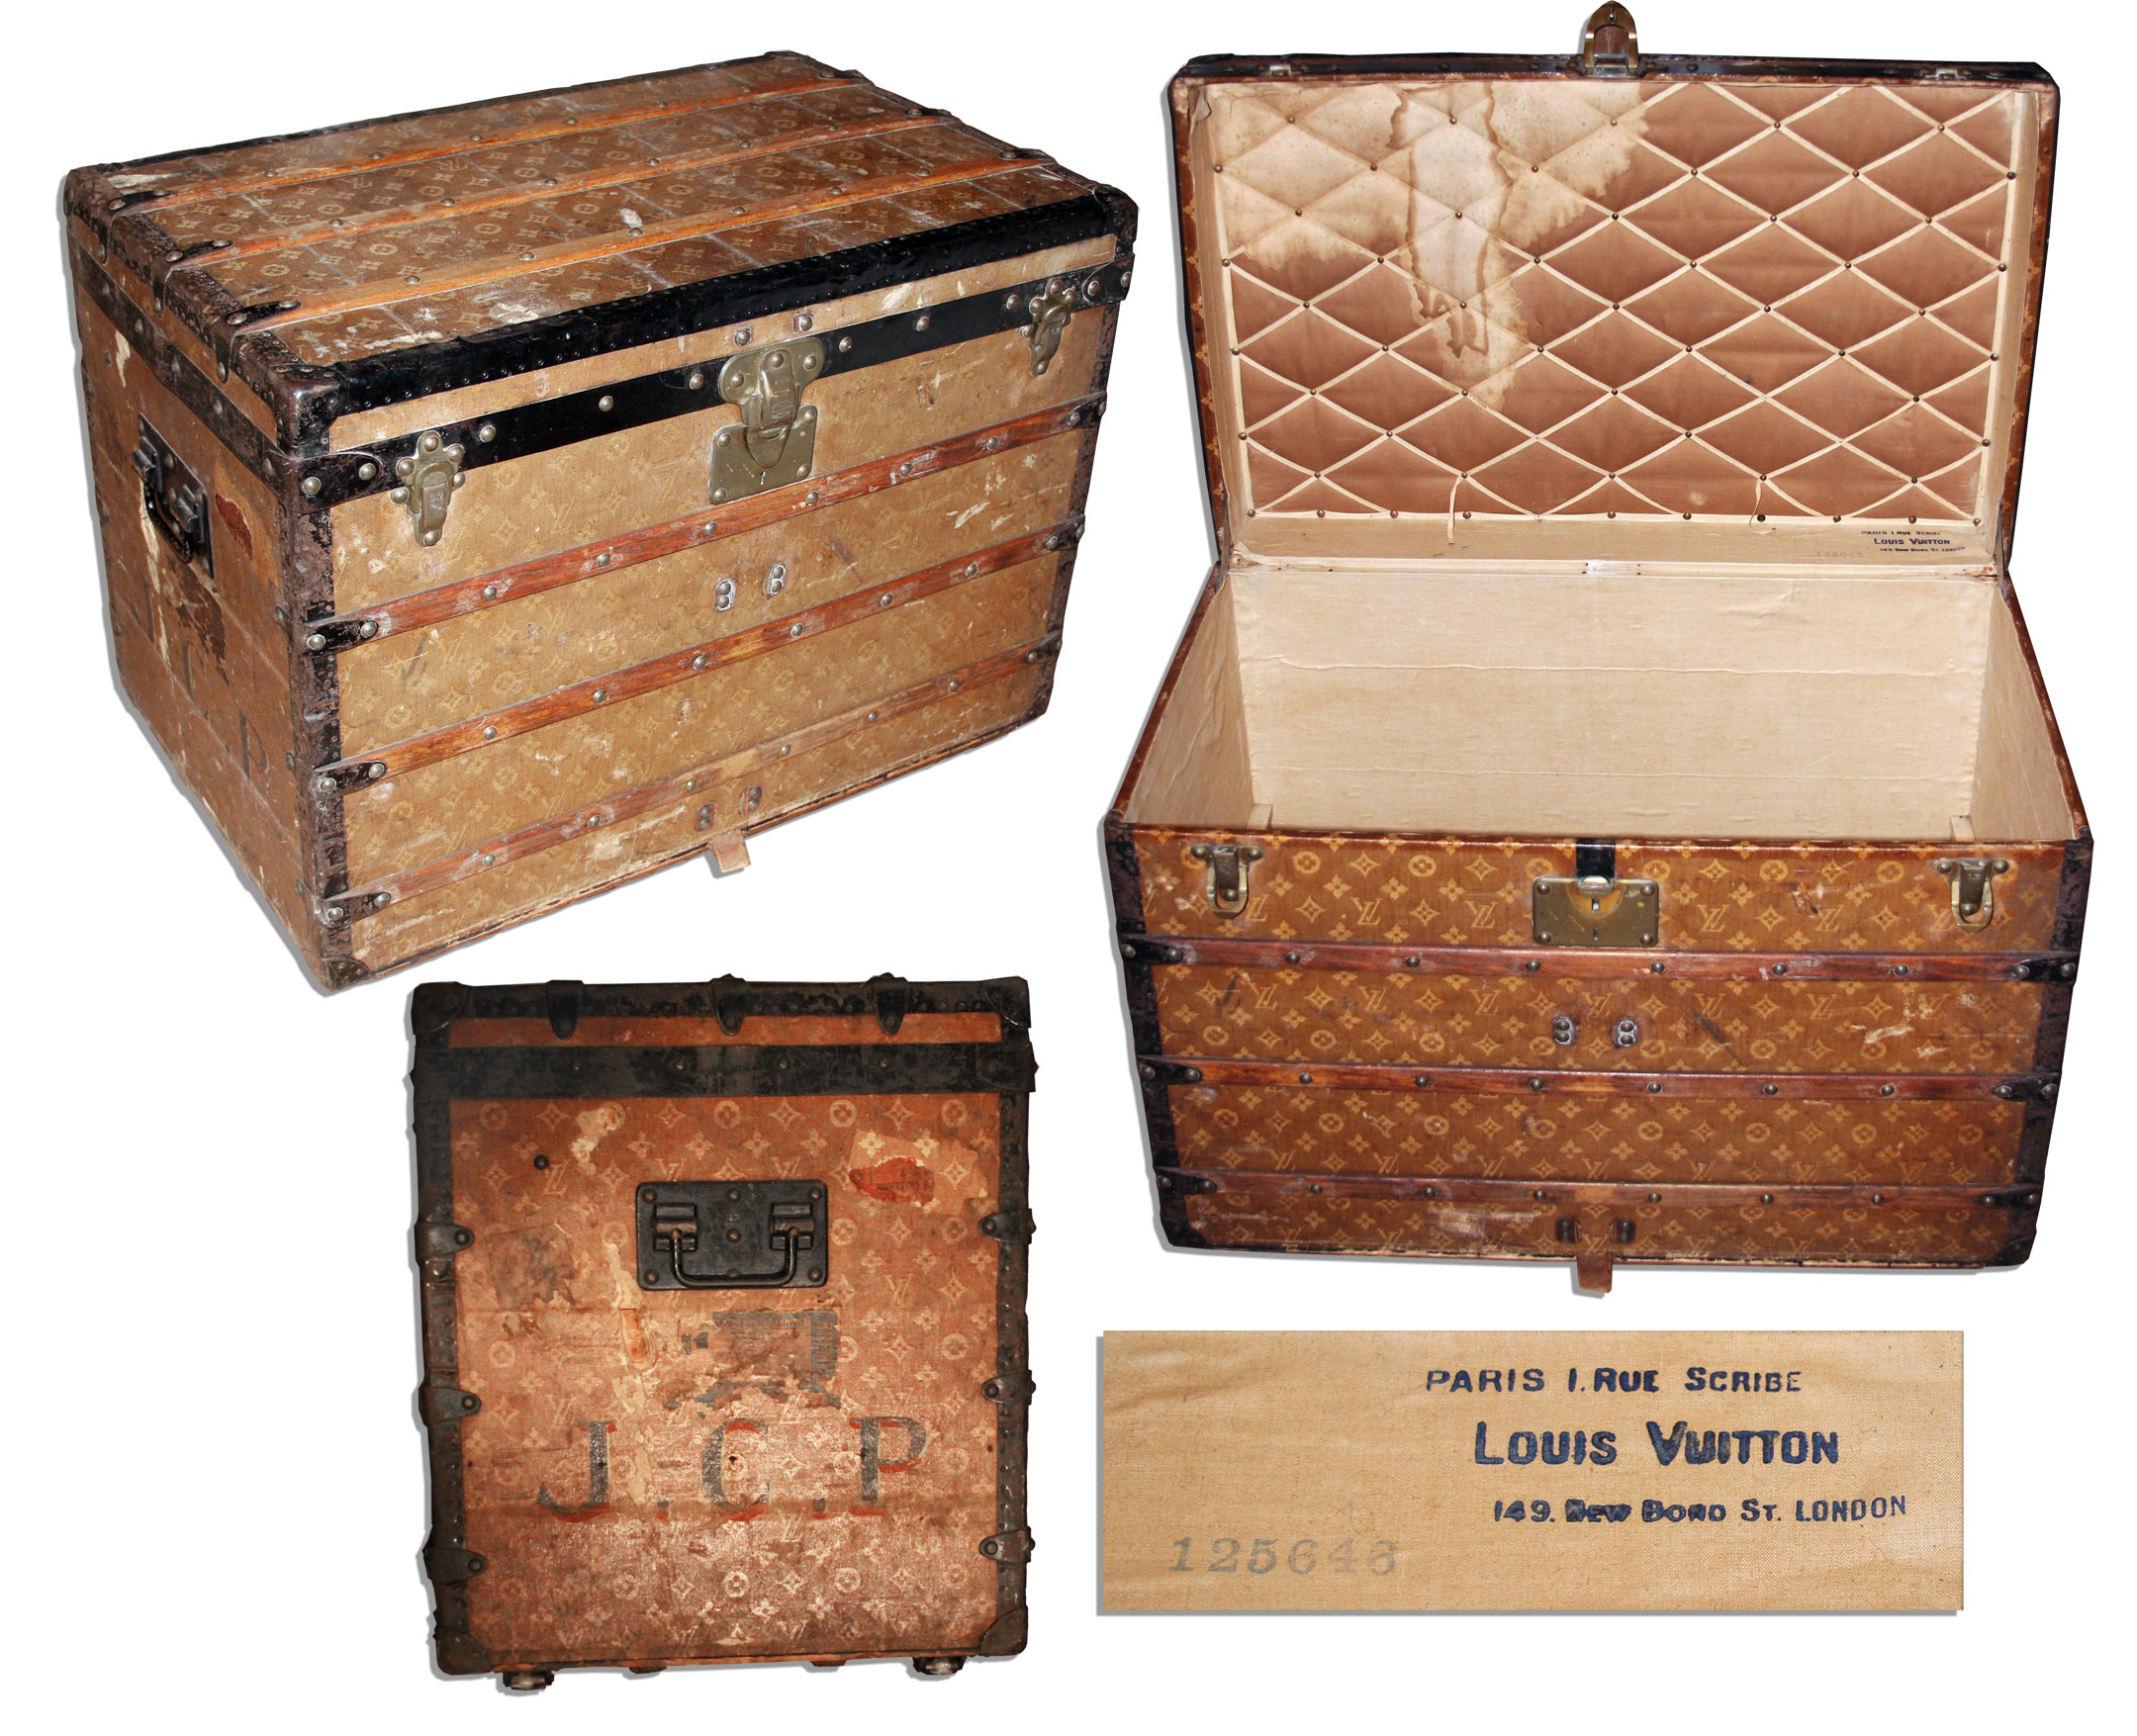 Giant Louis Vuitton trunk kicked out of Moscow